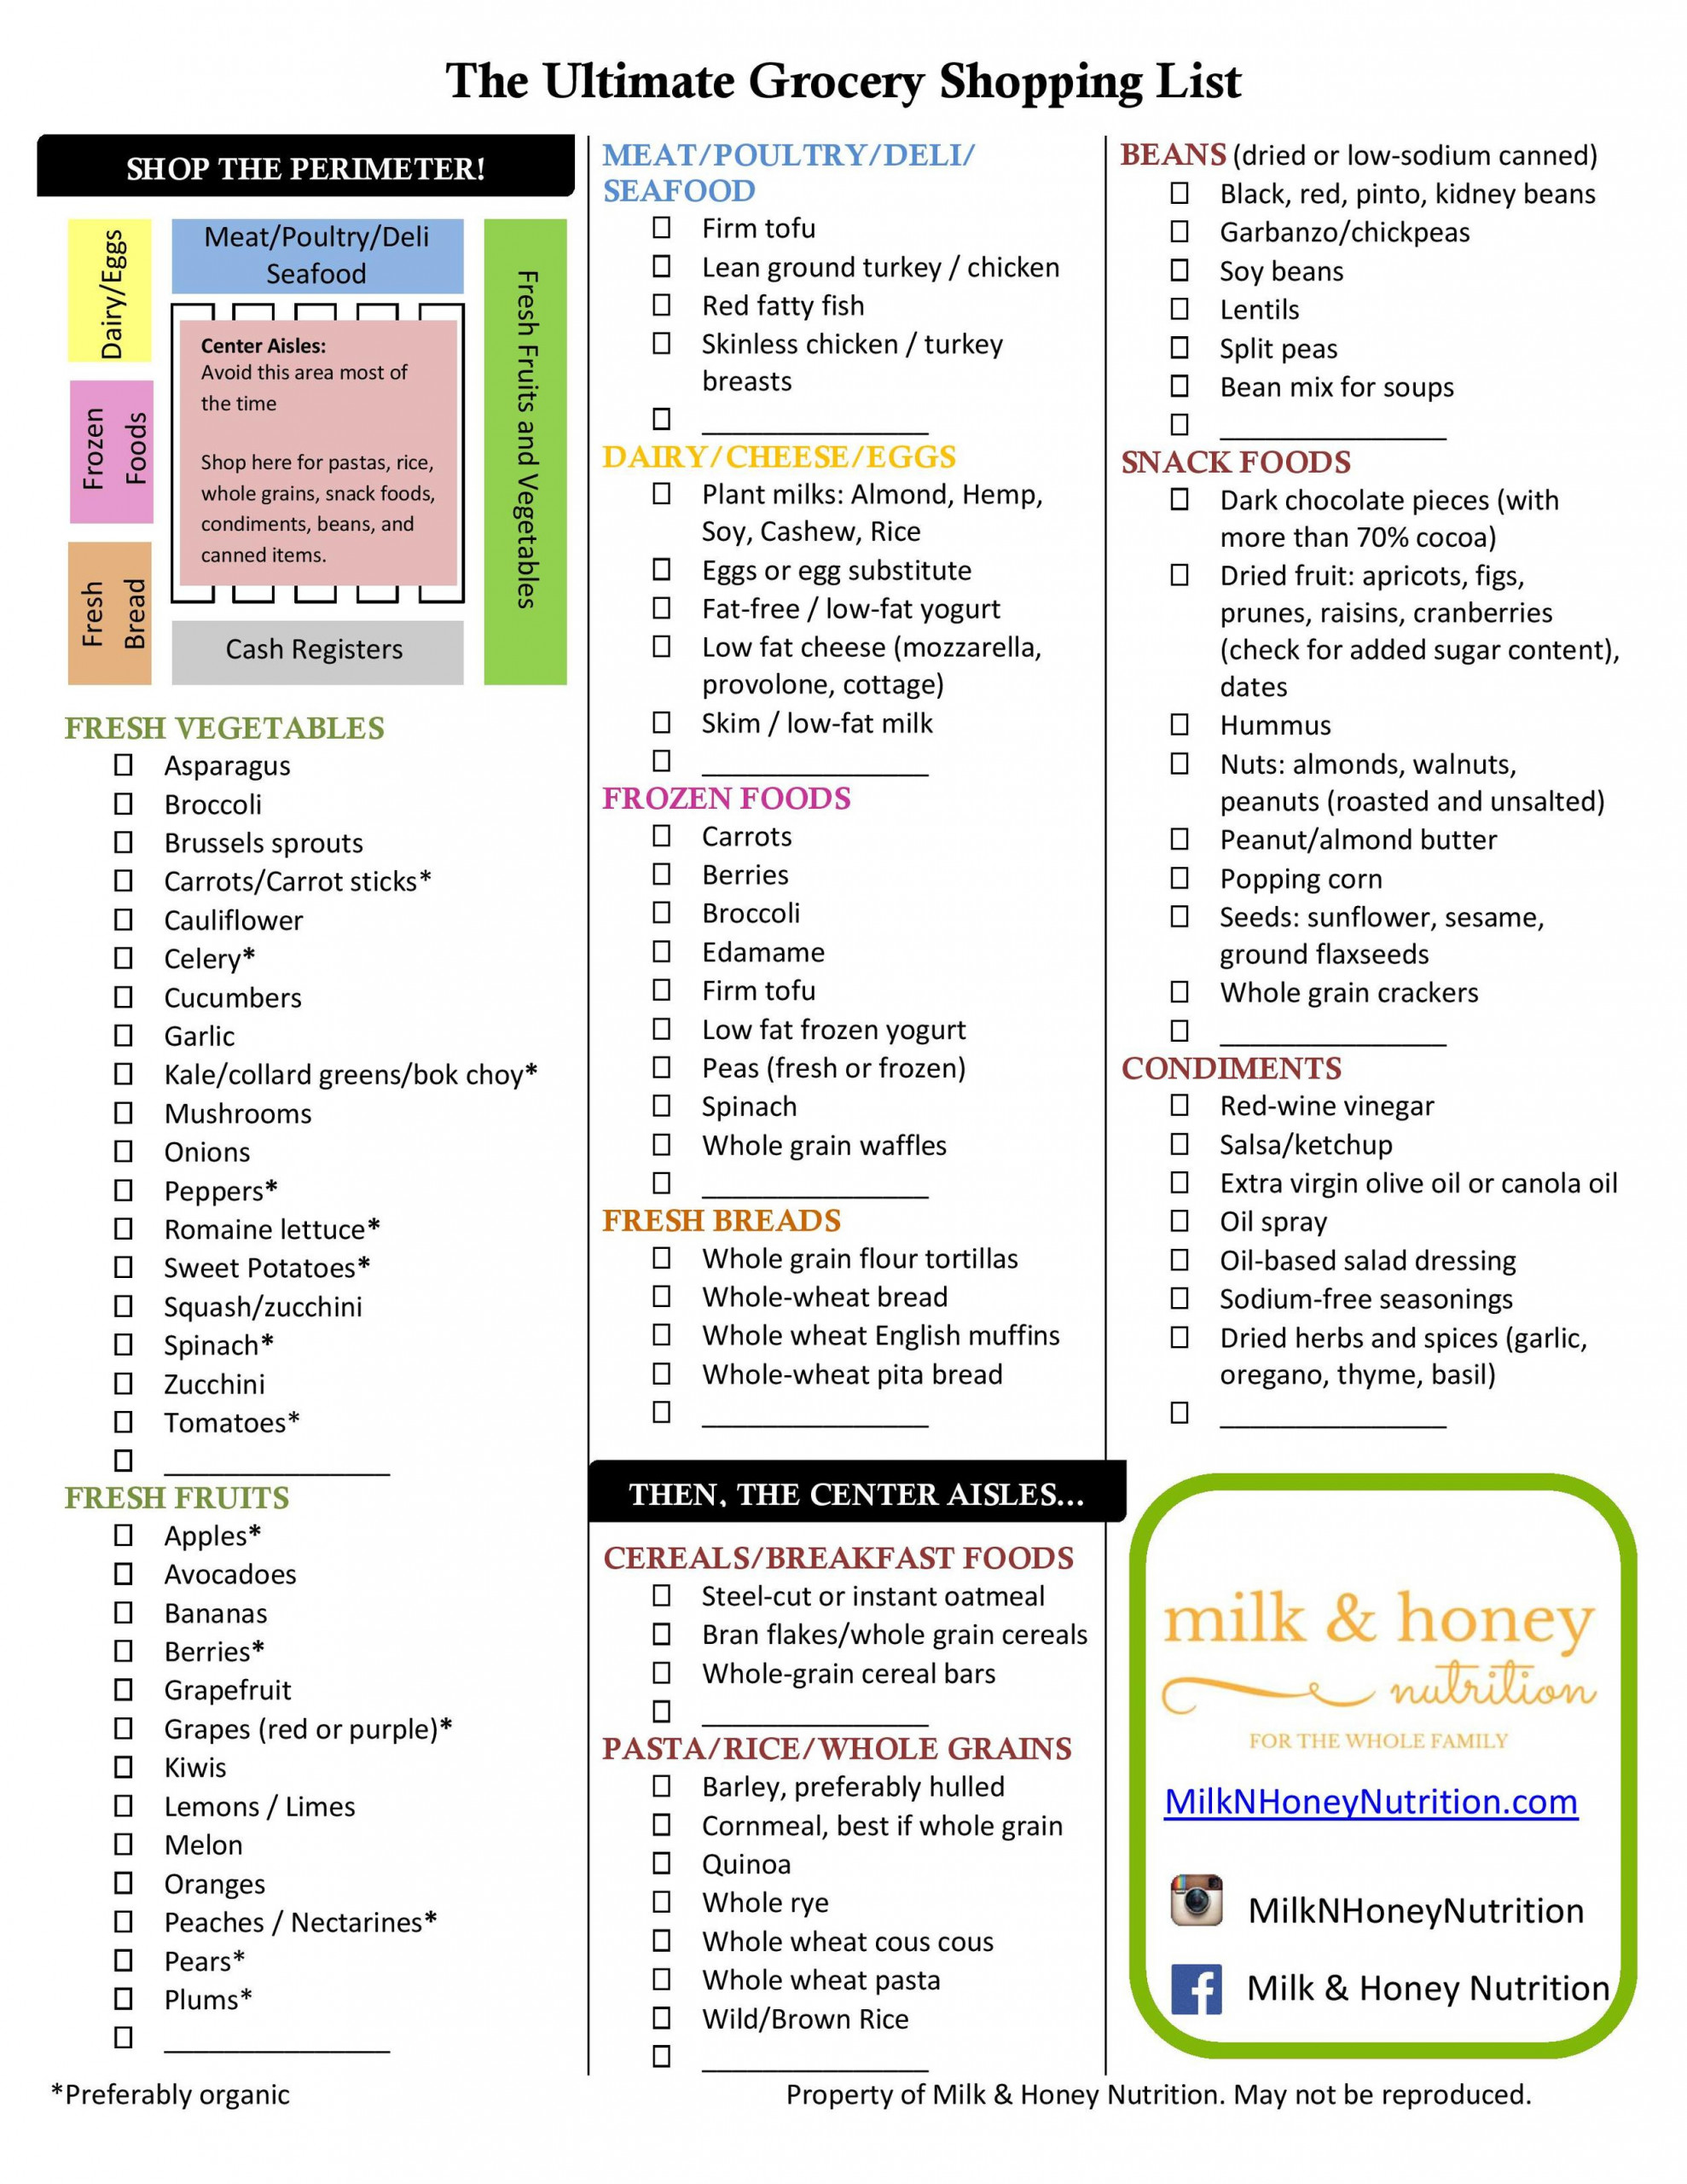 The Ultimate Grocery List Milk Honey Nutrition